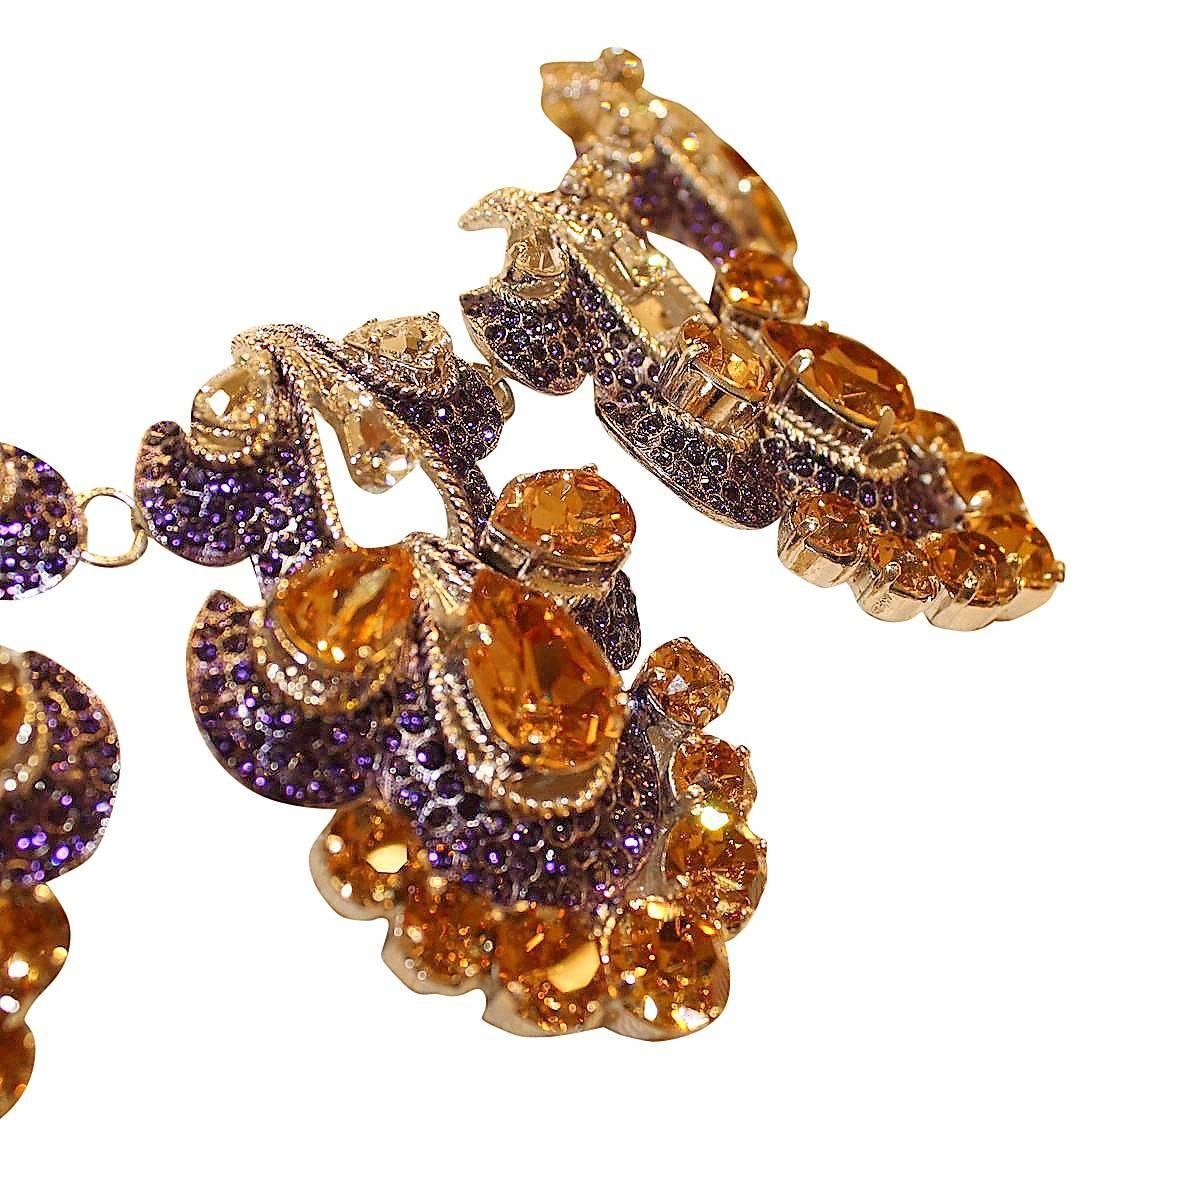 Amazing masterpiece by Carlo Zini
One of the world's best bijous designers
Non allergenic rhodium
Fleur de lis theme
Amazing creation of purple and yellow rhinestones and crystal
100% Artisanal work
Unique piece !
Condition: New from